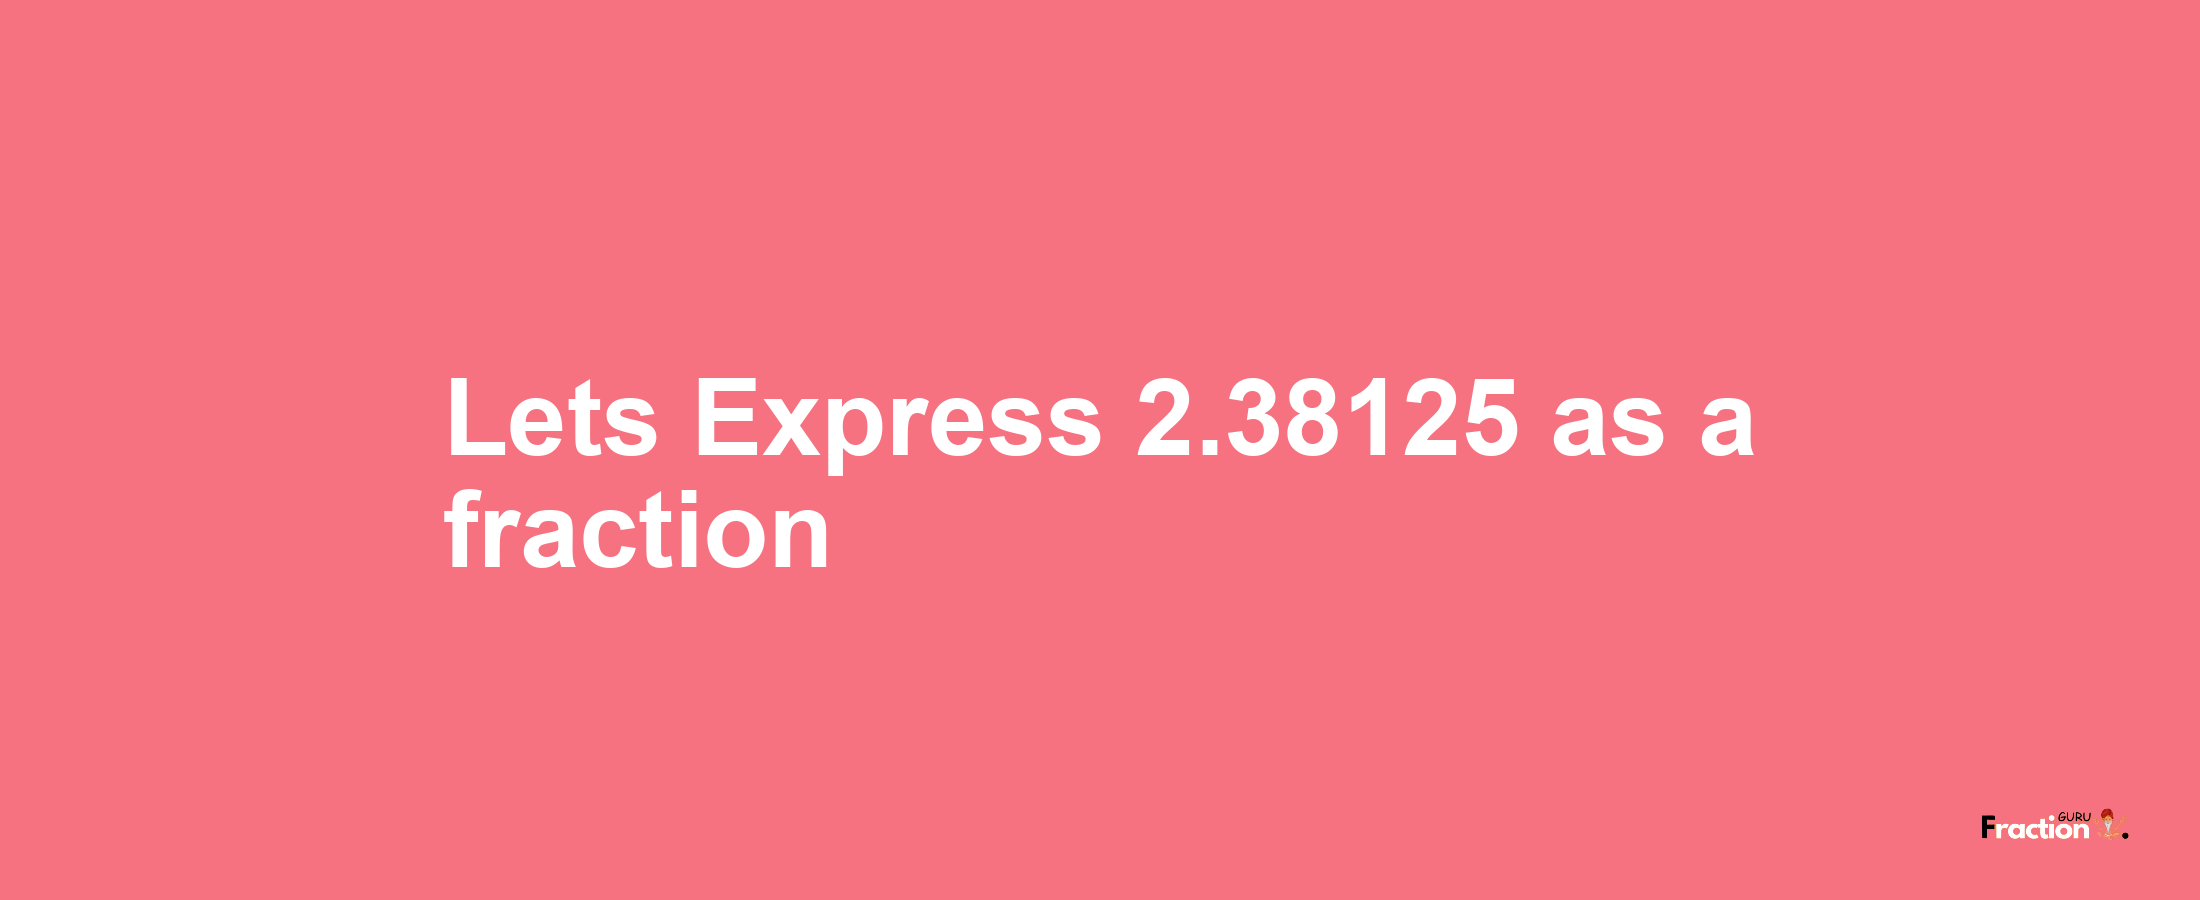 Lets Express 2.38125 as afraction